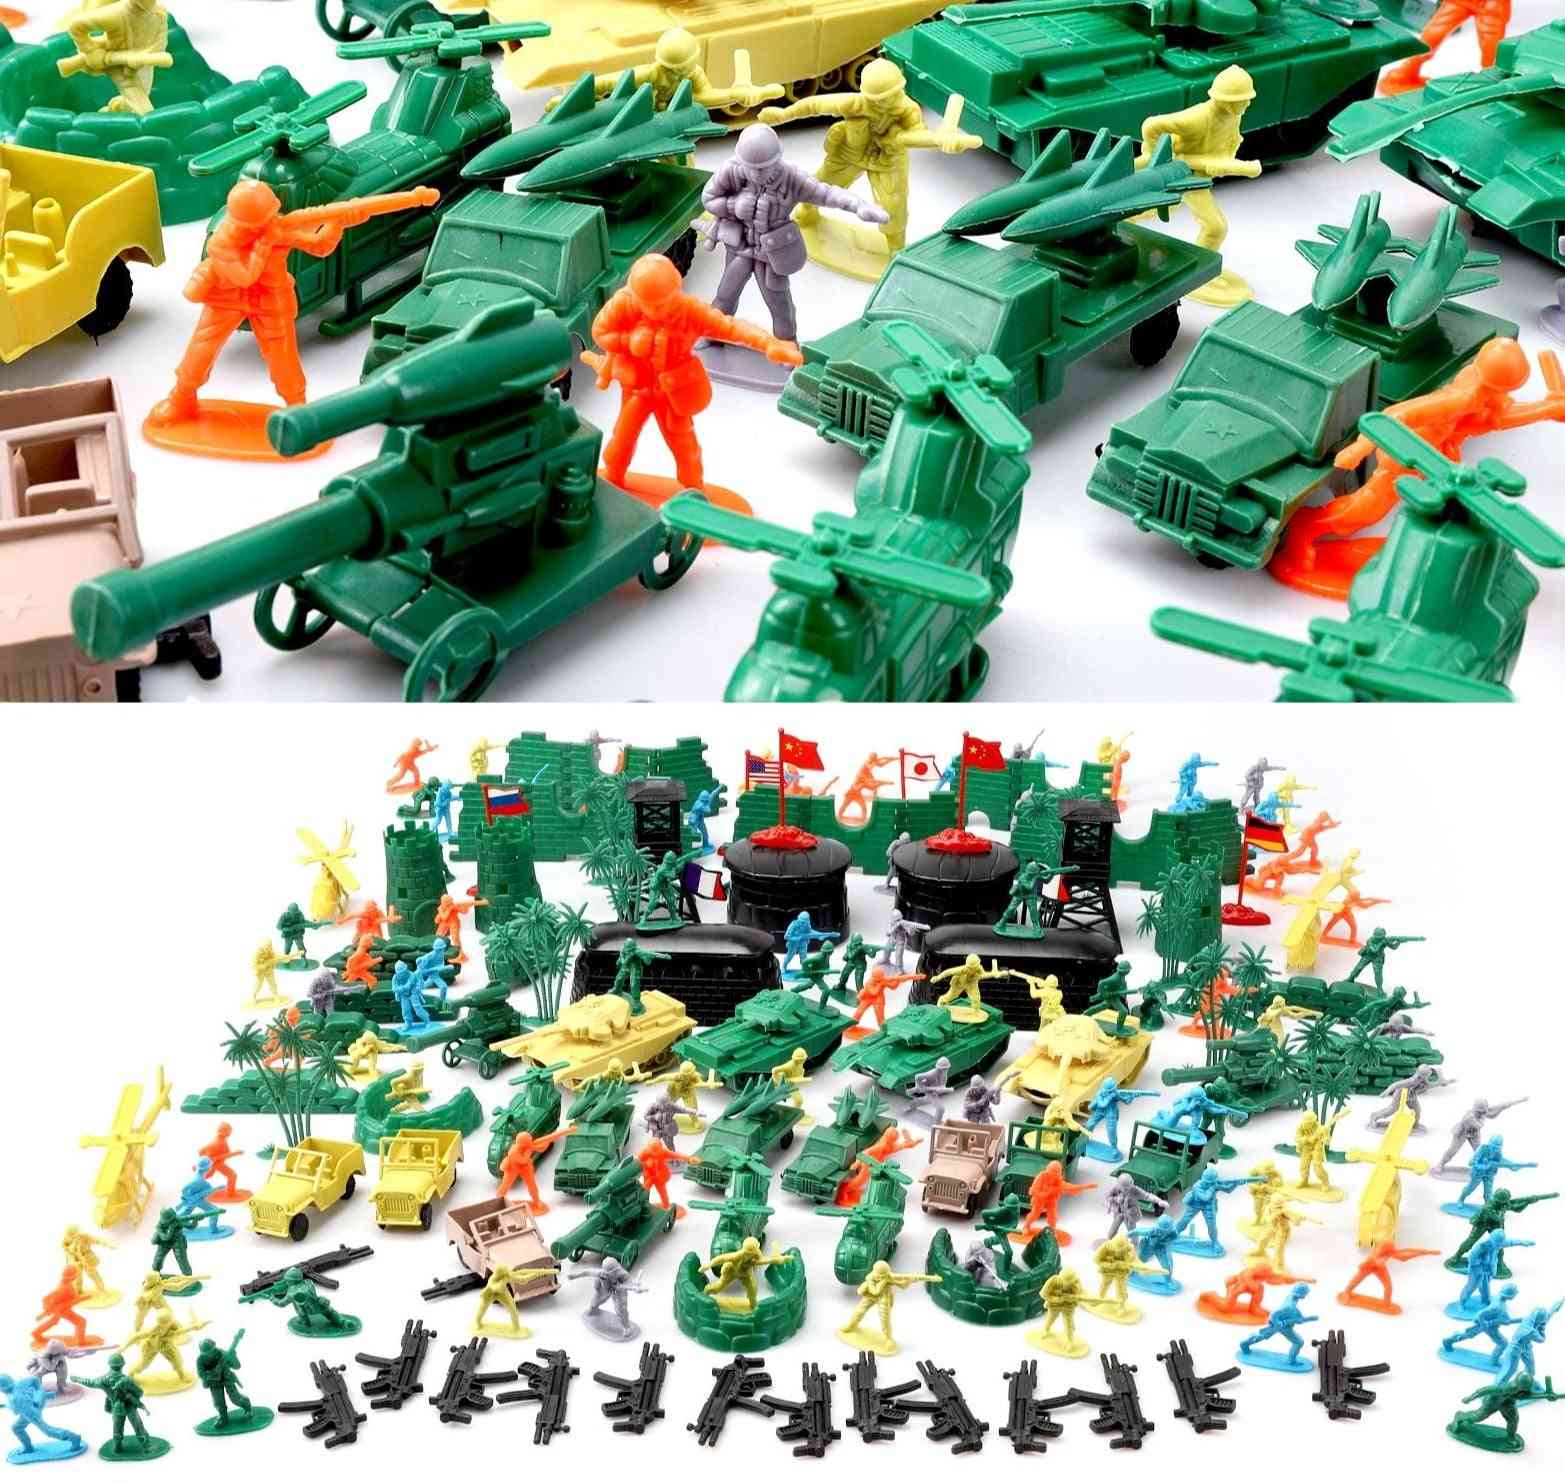 Army Men Military Toy & Tanks Planes Armored Vehicles